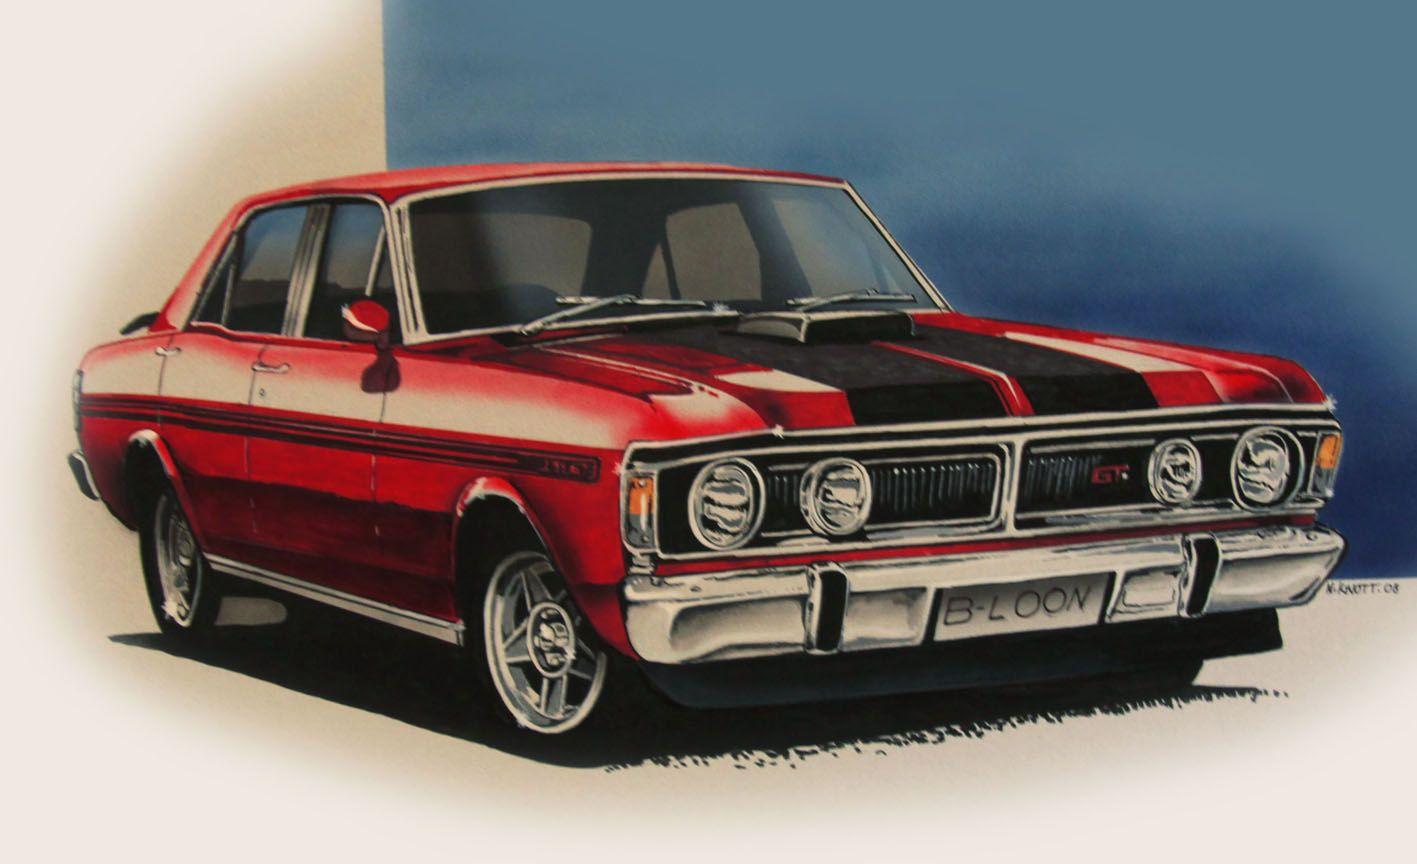 Xy Ford Falcon Phase Iii Gtho HD Wallpaper. Background